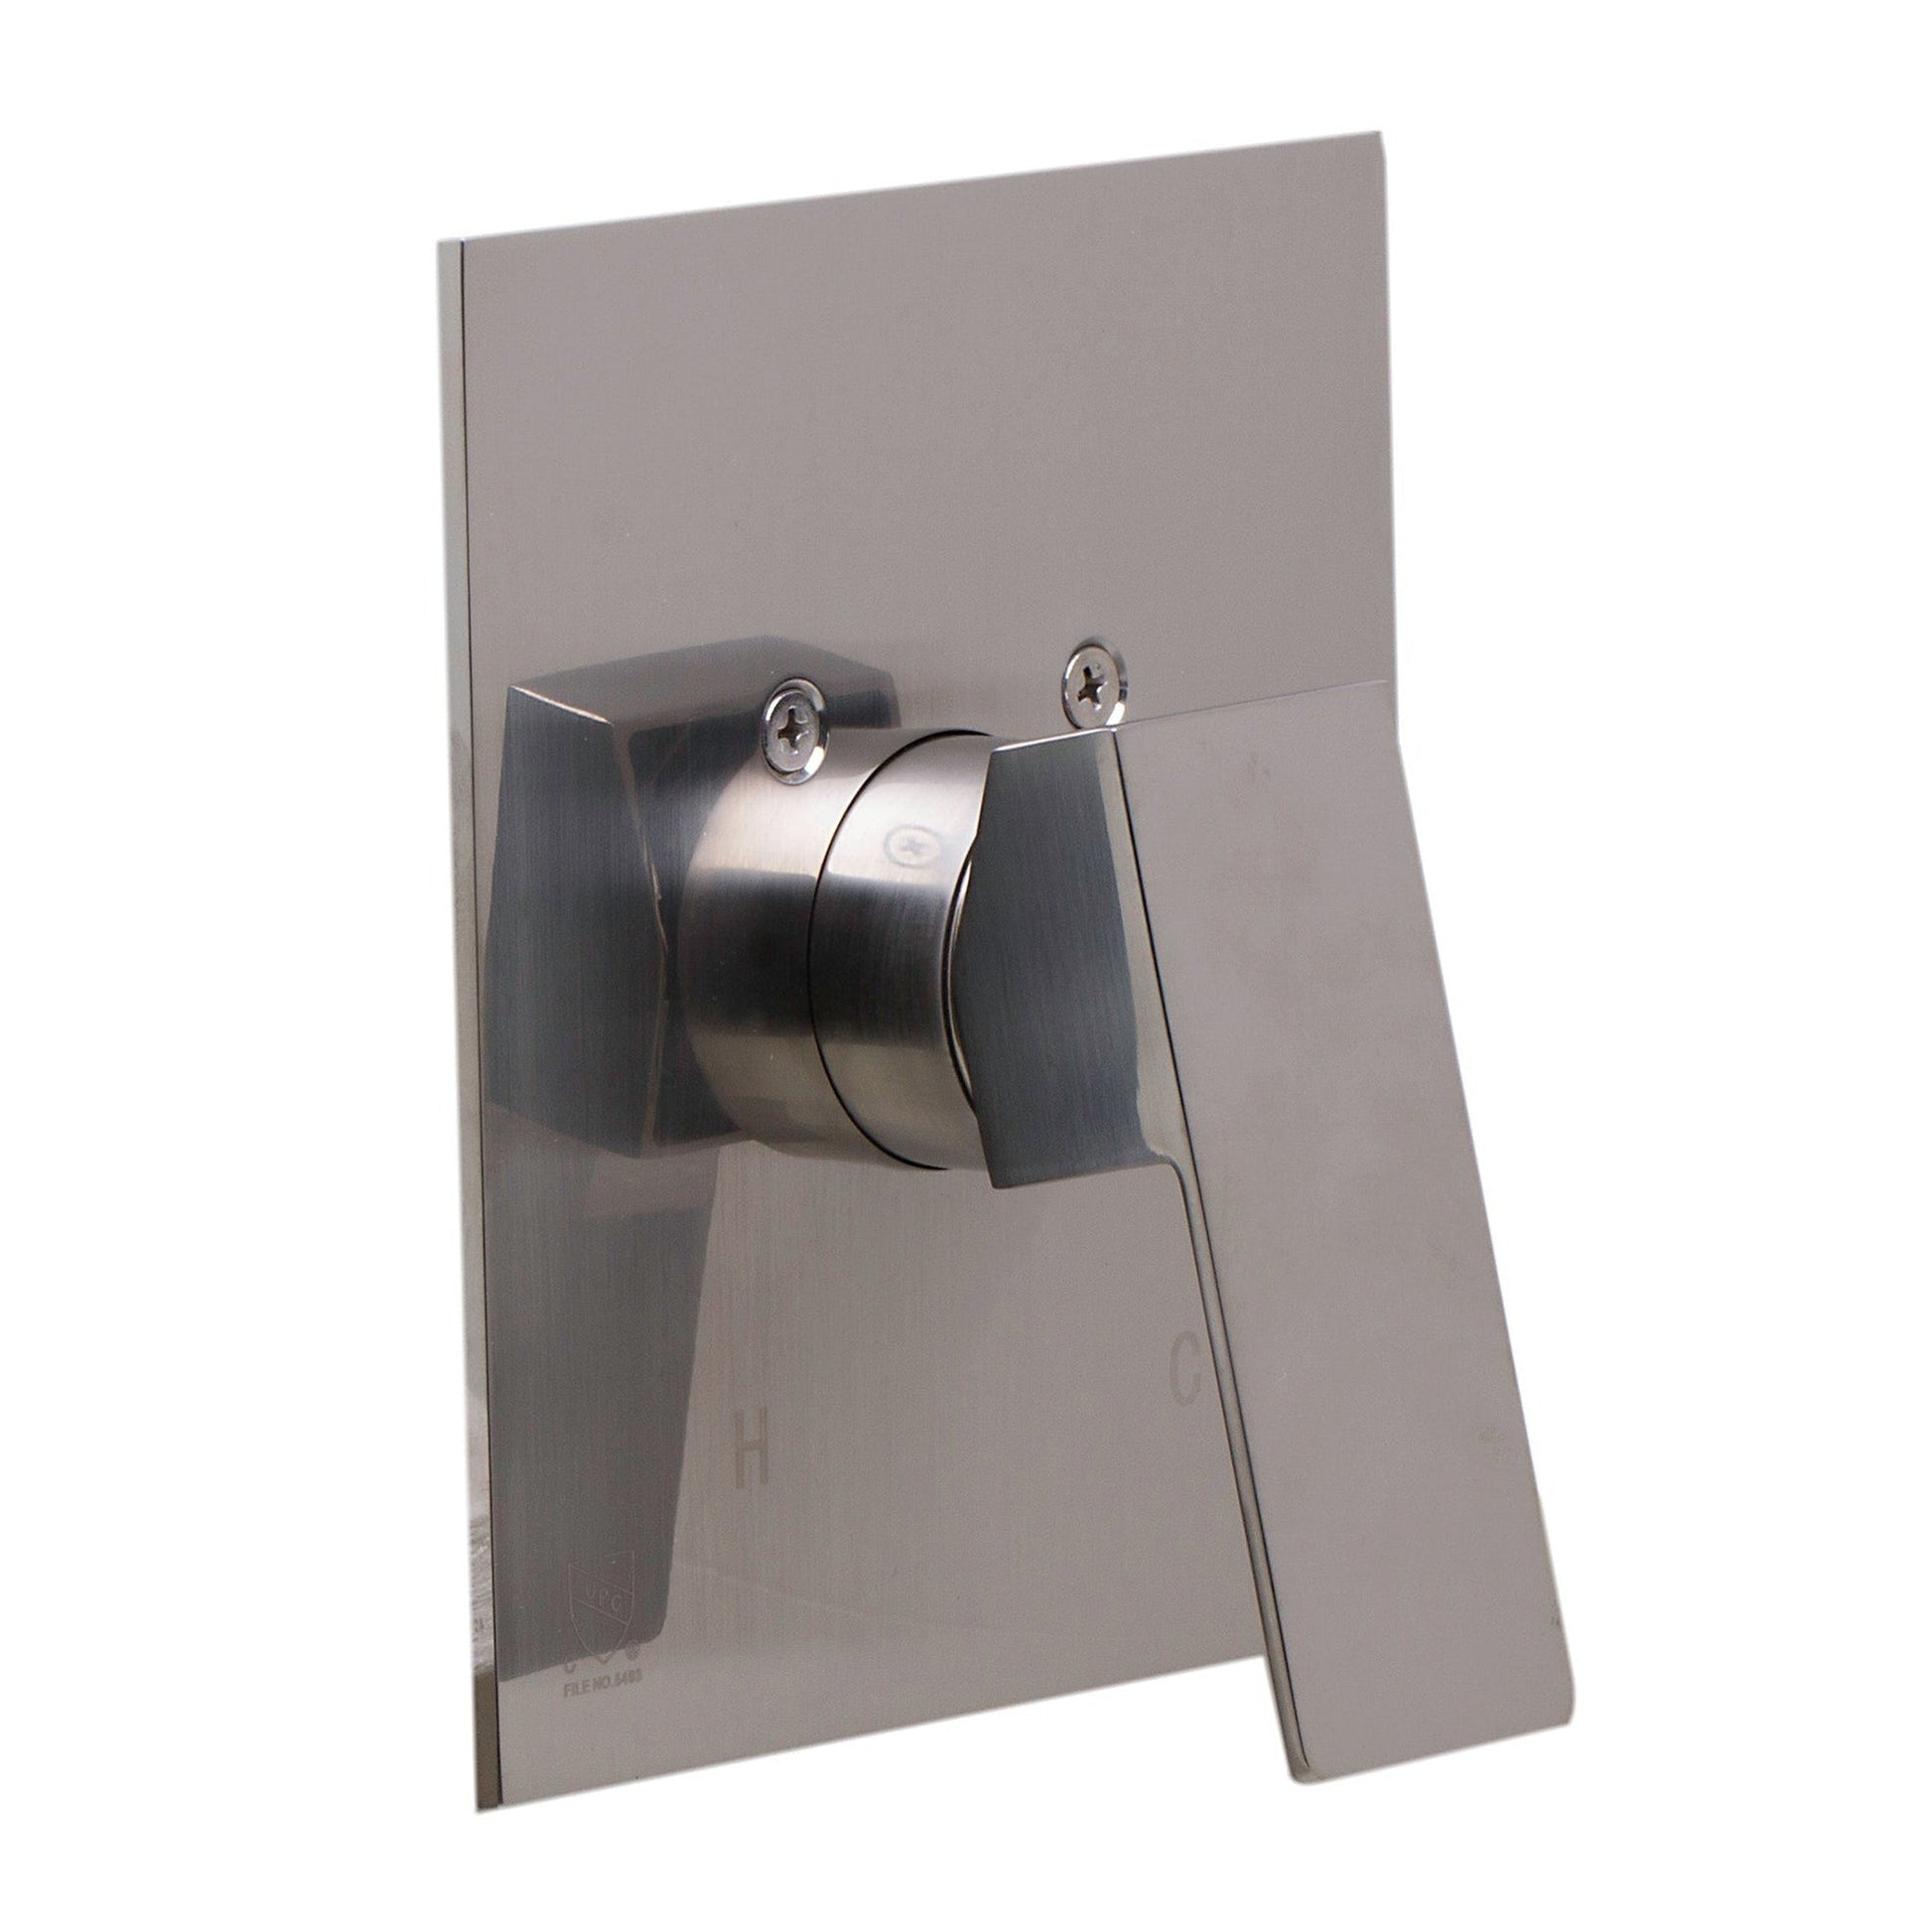 ALFI Brand AB5501-BN Square Brushed Nickel Shower Valve Mixer With Single Lever Handle